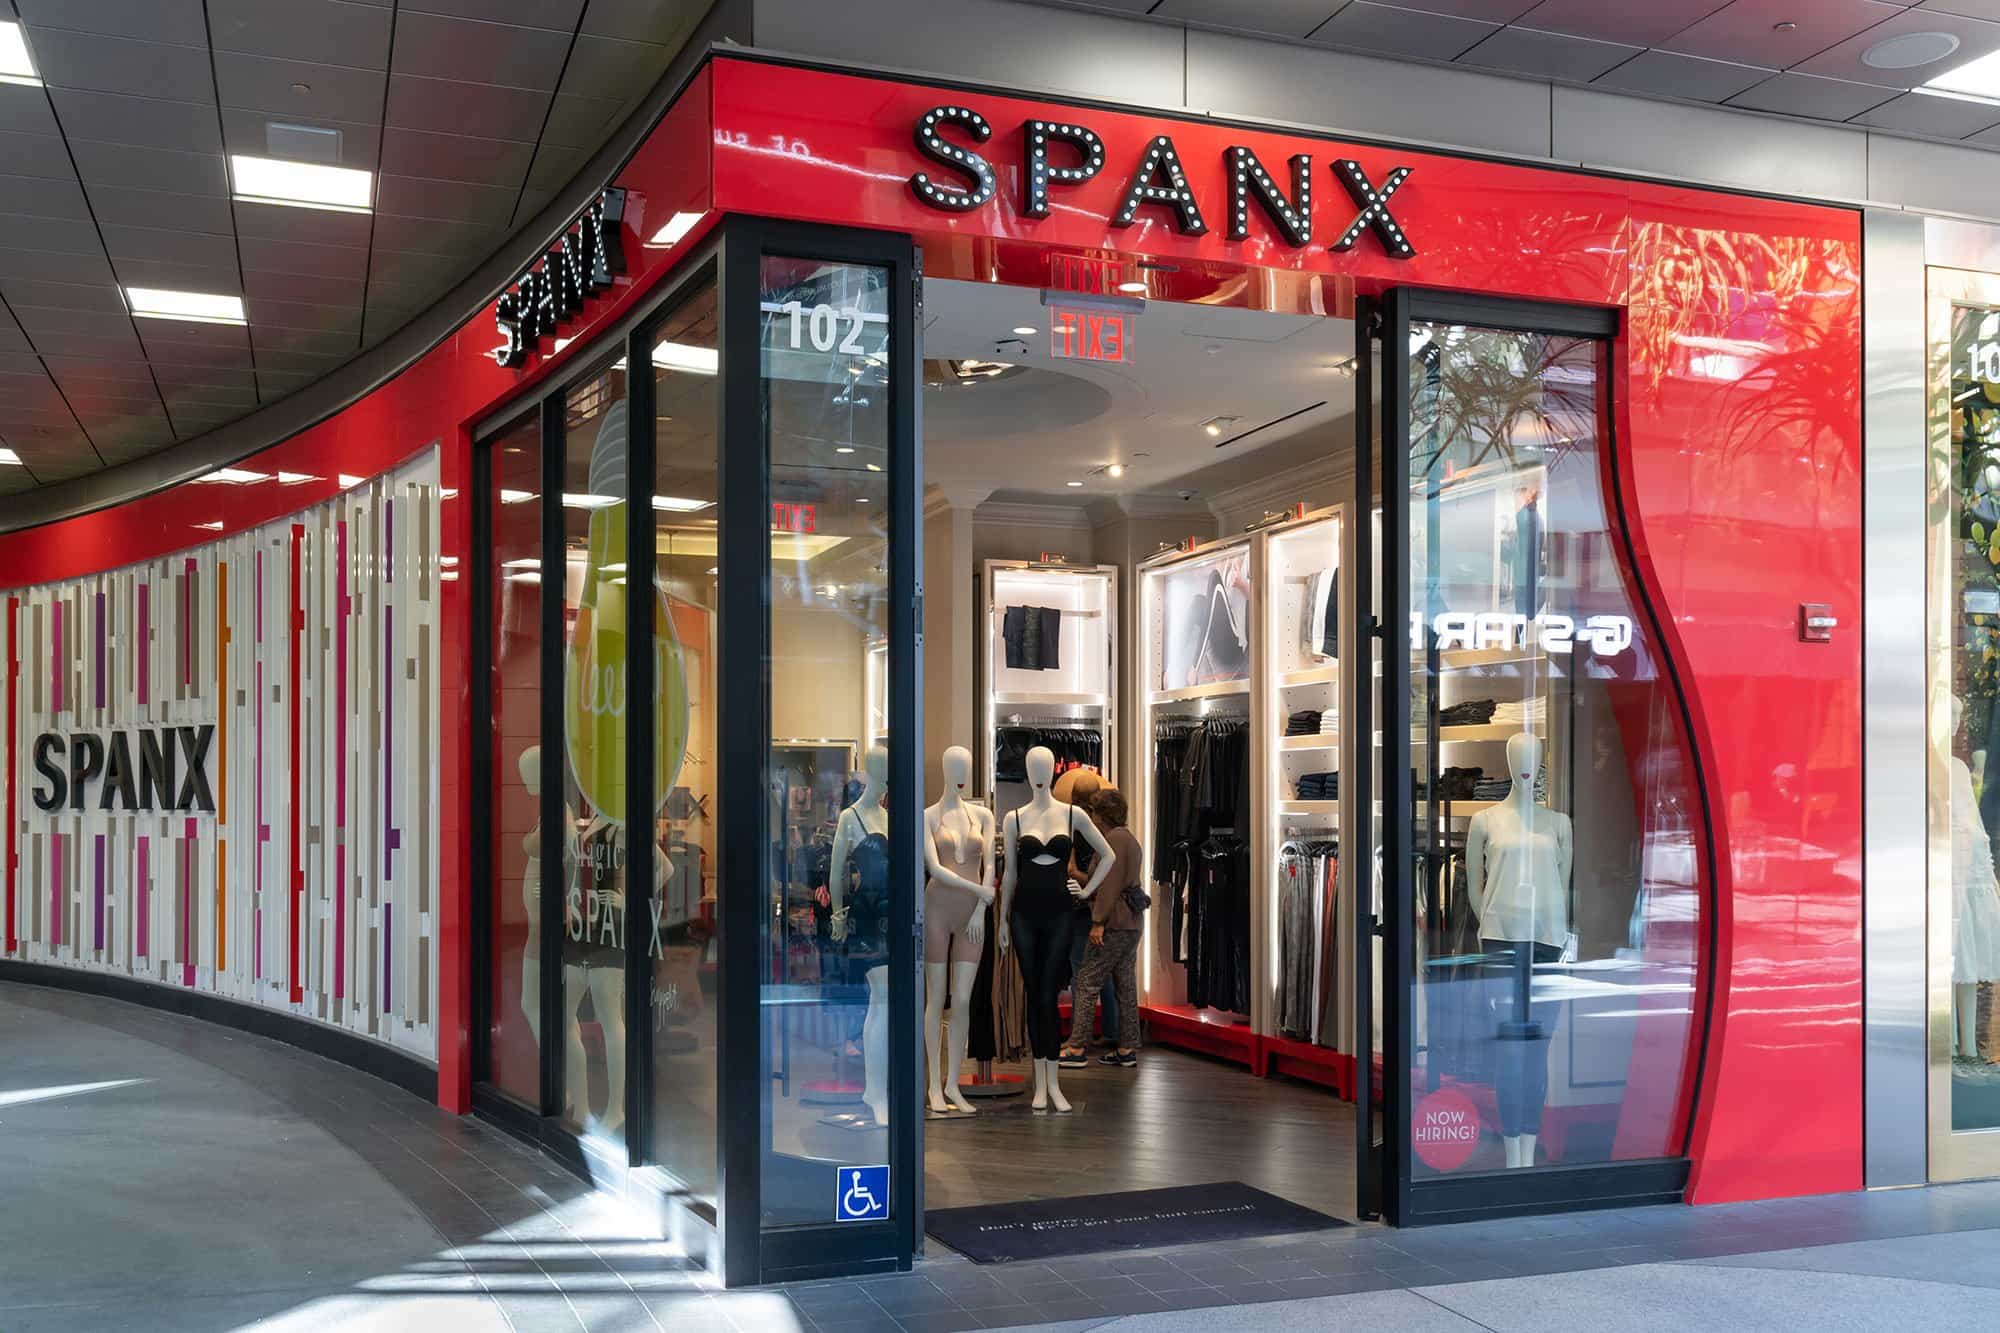 How to Build A Billion-Dollar DTC Brand: The Story of Spanx